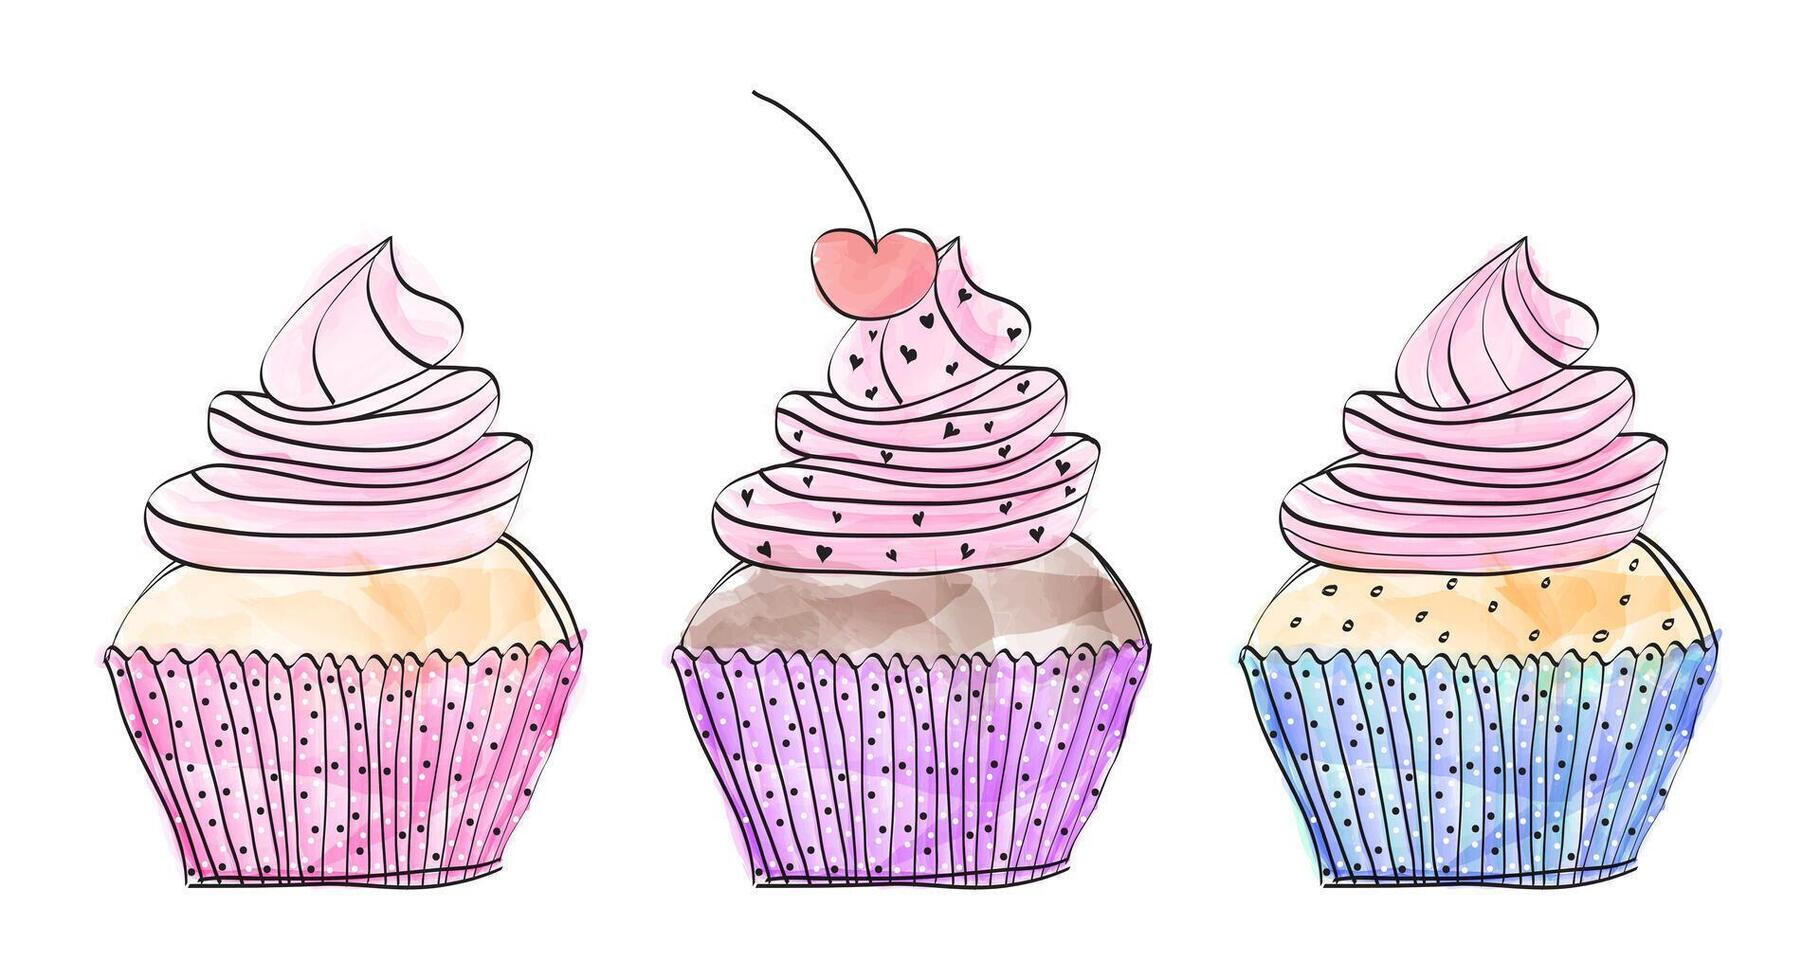 Beautiful Cupcakes Set or Muffin Collection in Colorful Watercolor Doodle Style on White Background vector